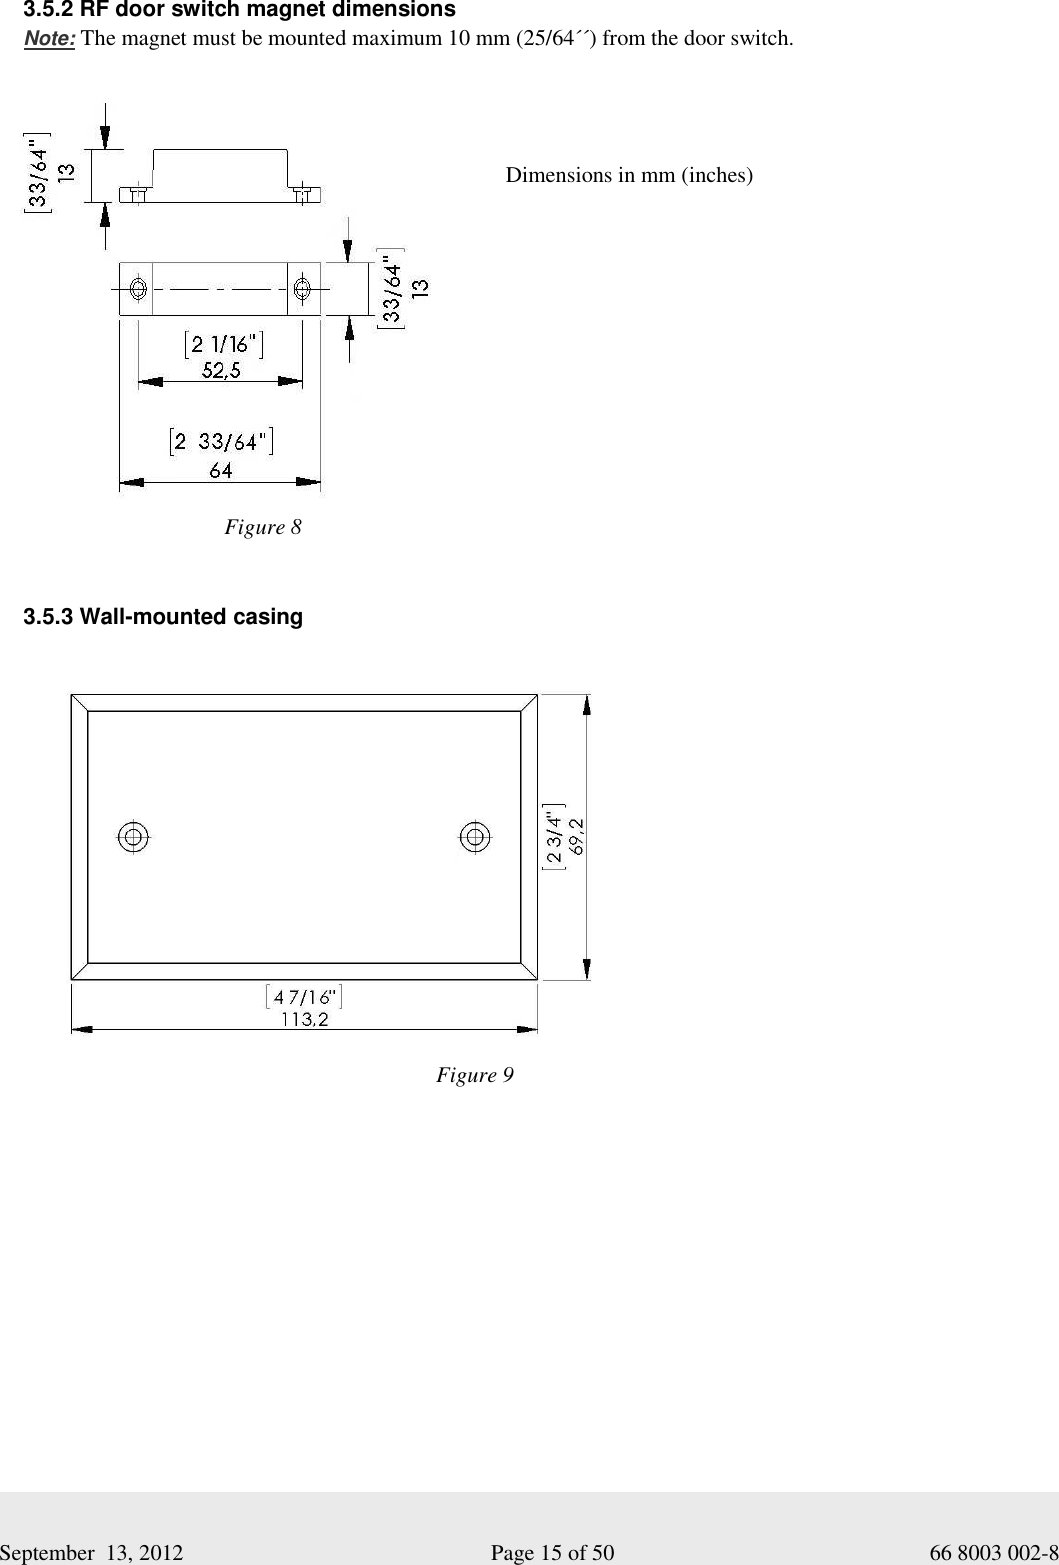     September  13, 2012                                                      Page 15 of 50                                           66 8003 002-8 3.5.2 RF door switch magnet dimensions Note: The magnet must be mounted maximum 10 mm (25/64´´) from the door switch.           3.5.3 Wall-mounted casingFigure 8 Dimensions in mm (inches) Figure 9 